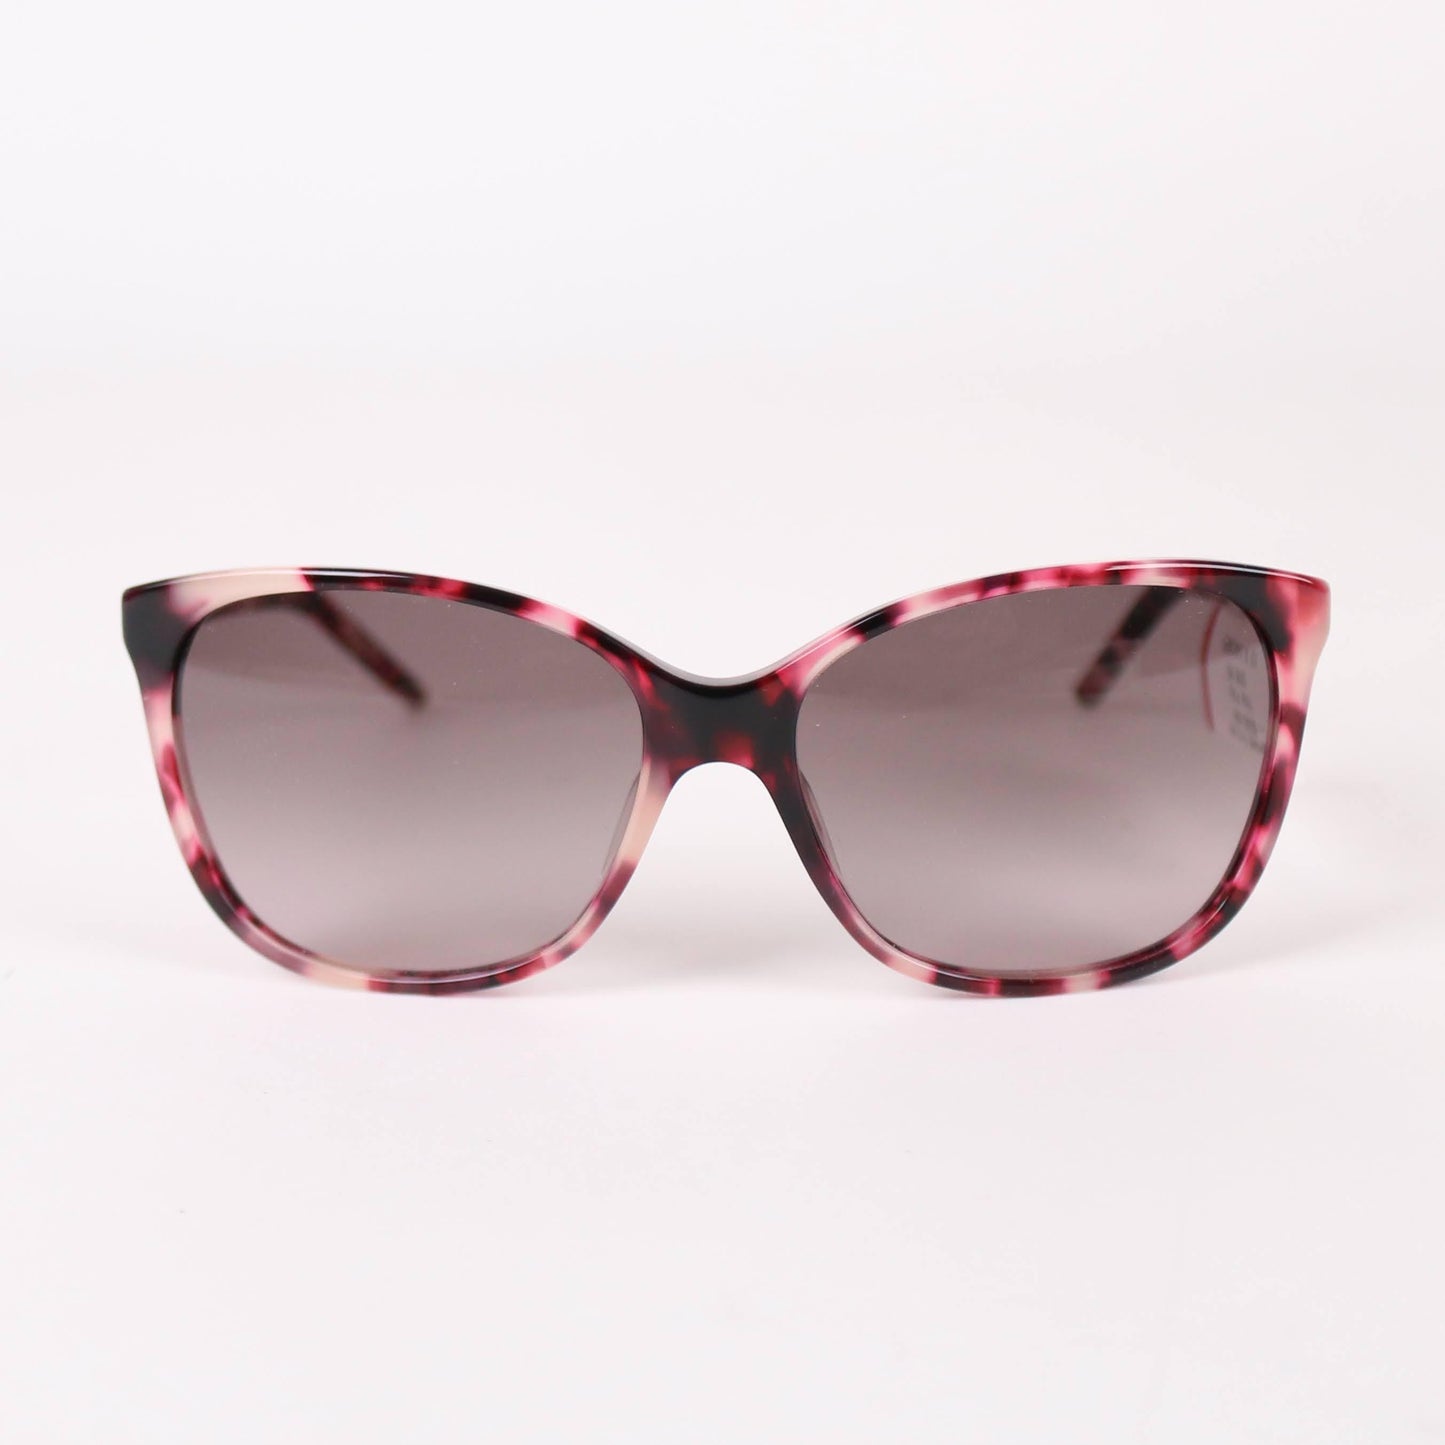 ( AS IS ) Marc Jacobs 807IR Sunglasses